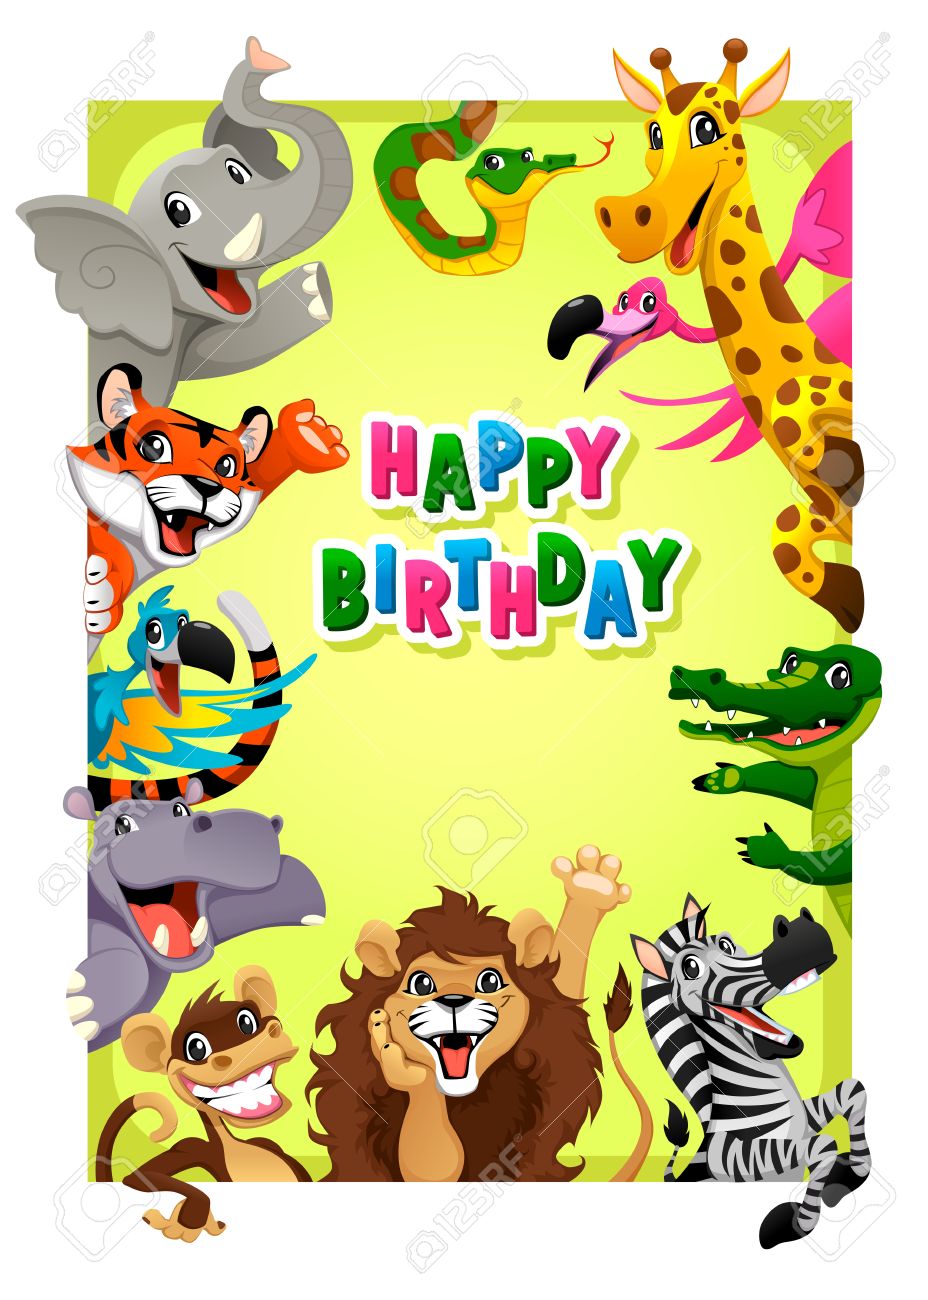 Happy Birthday Cartoon Images Free Download On Clipartmag